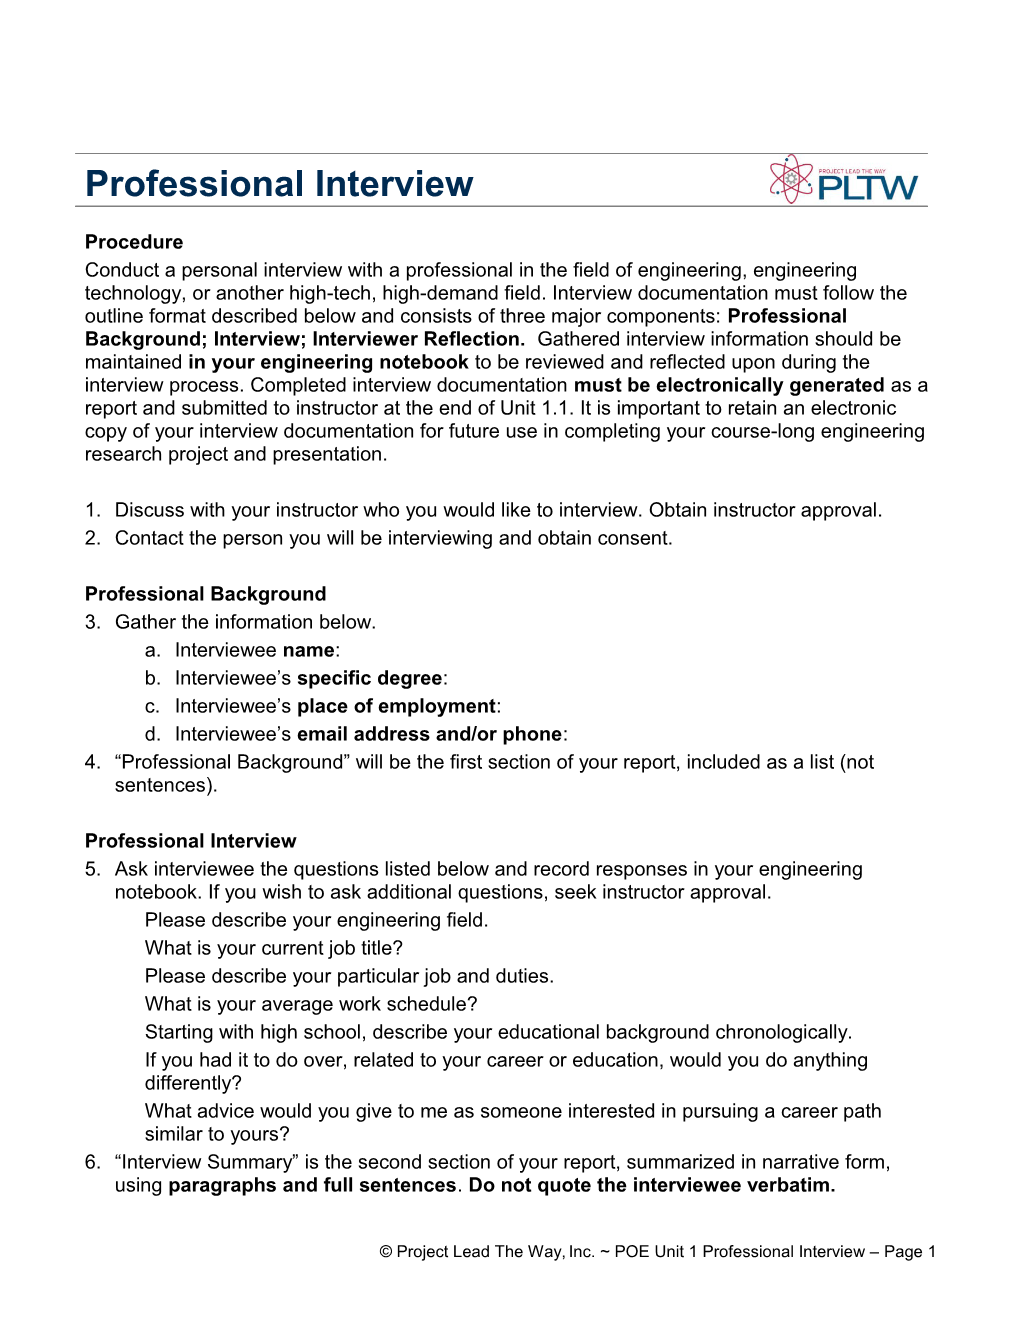 Activity 1.4.1 Professional Interview